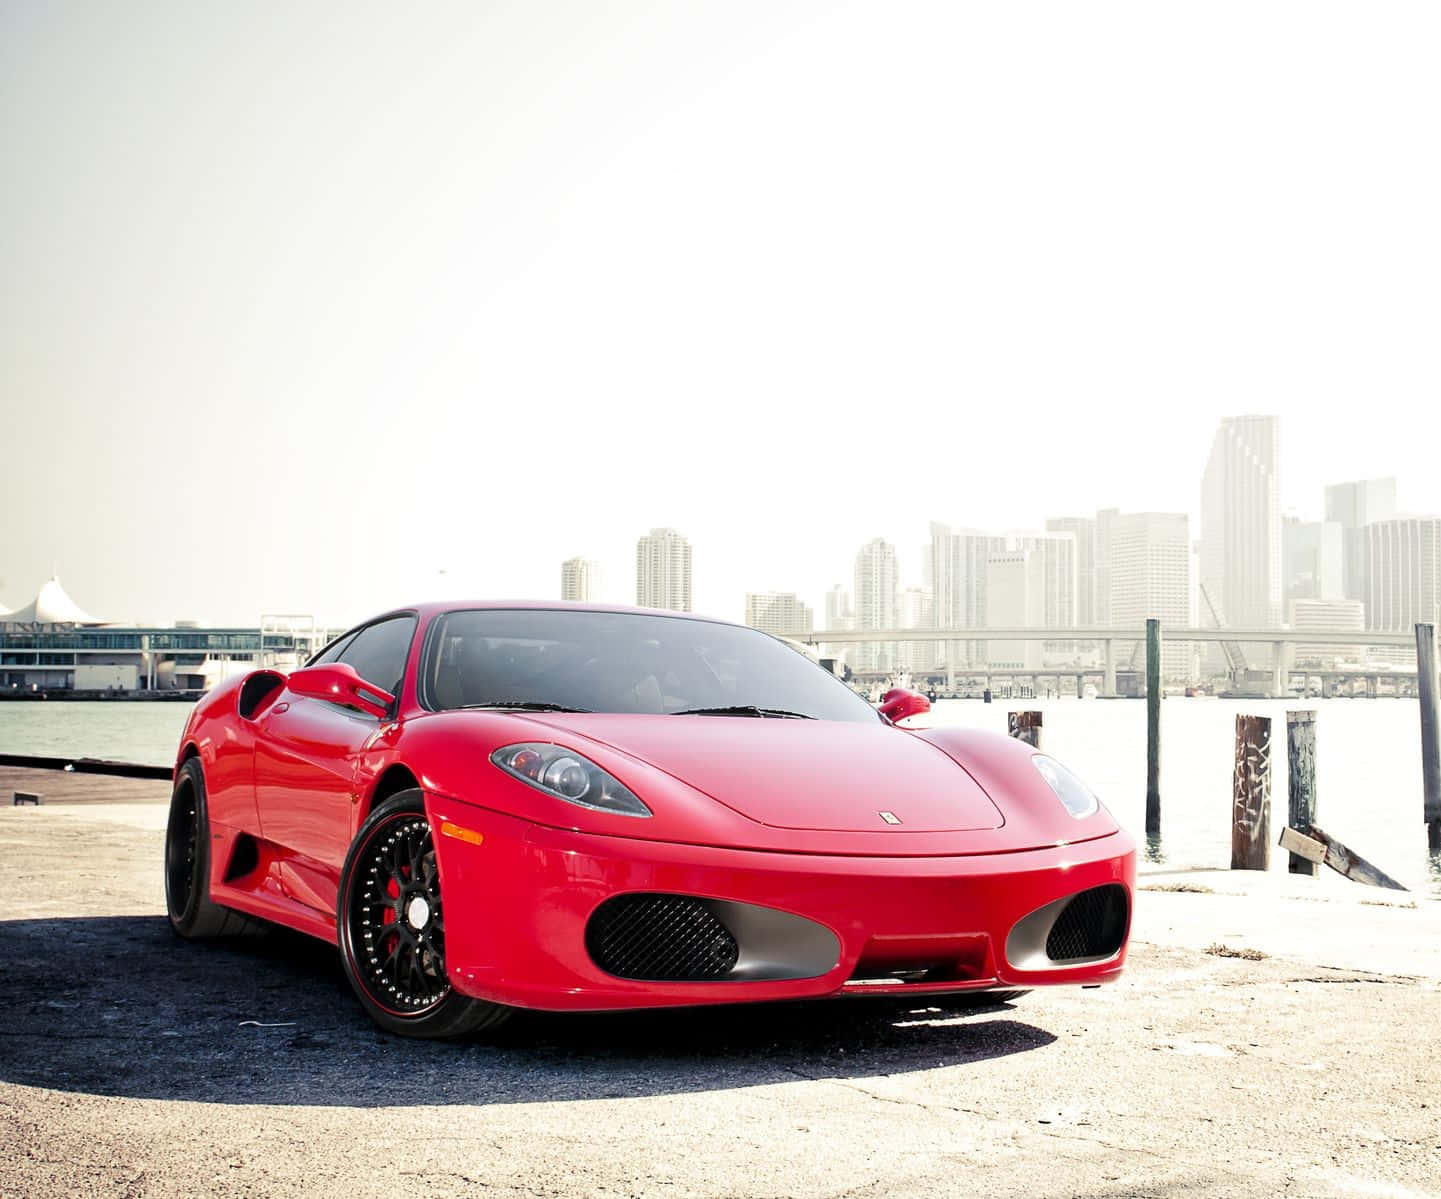 Stunning red Ferrari 360 Modena parked on a picturesque location Wallpaper